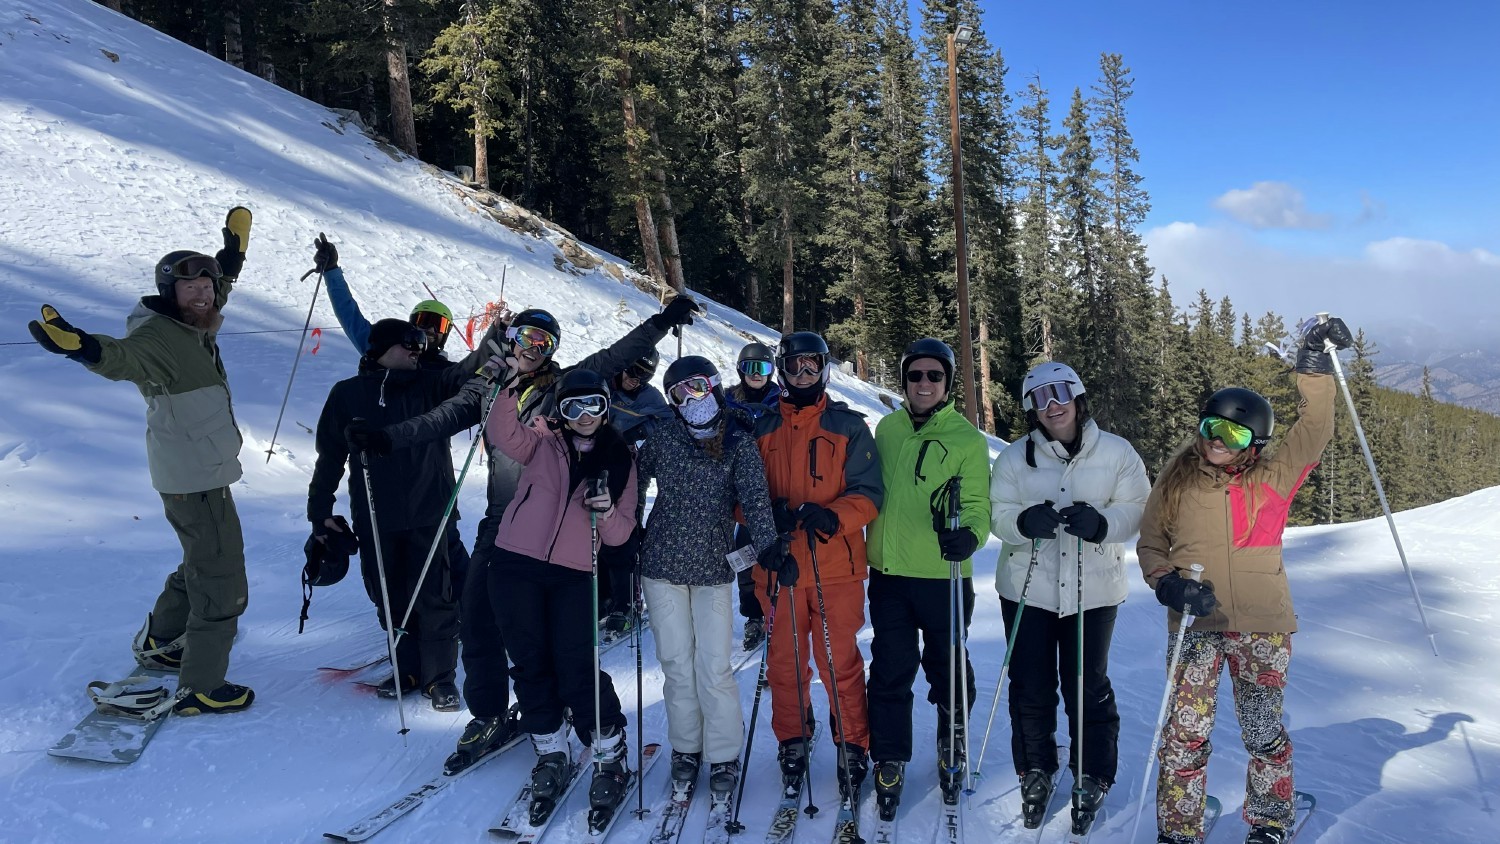 Our Denver, CO office on their annual ski day!